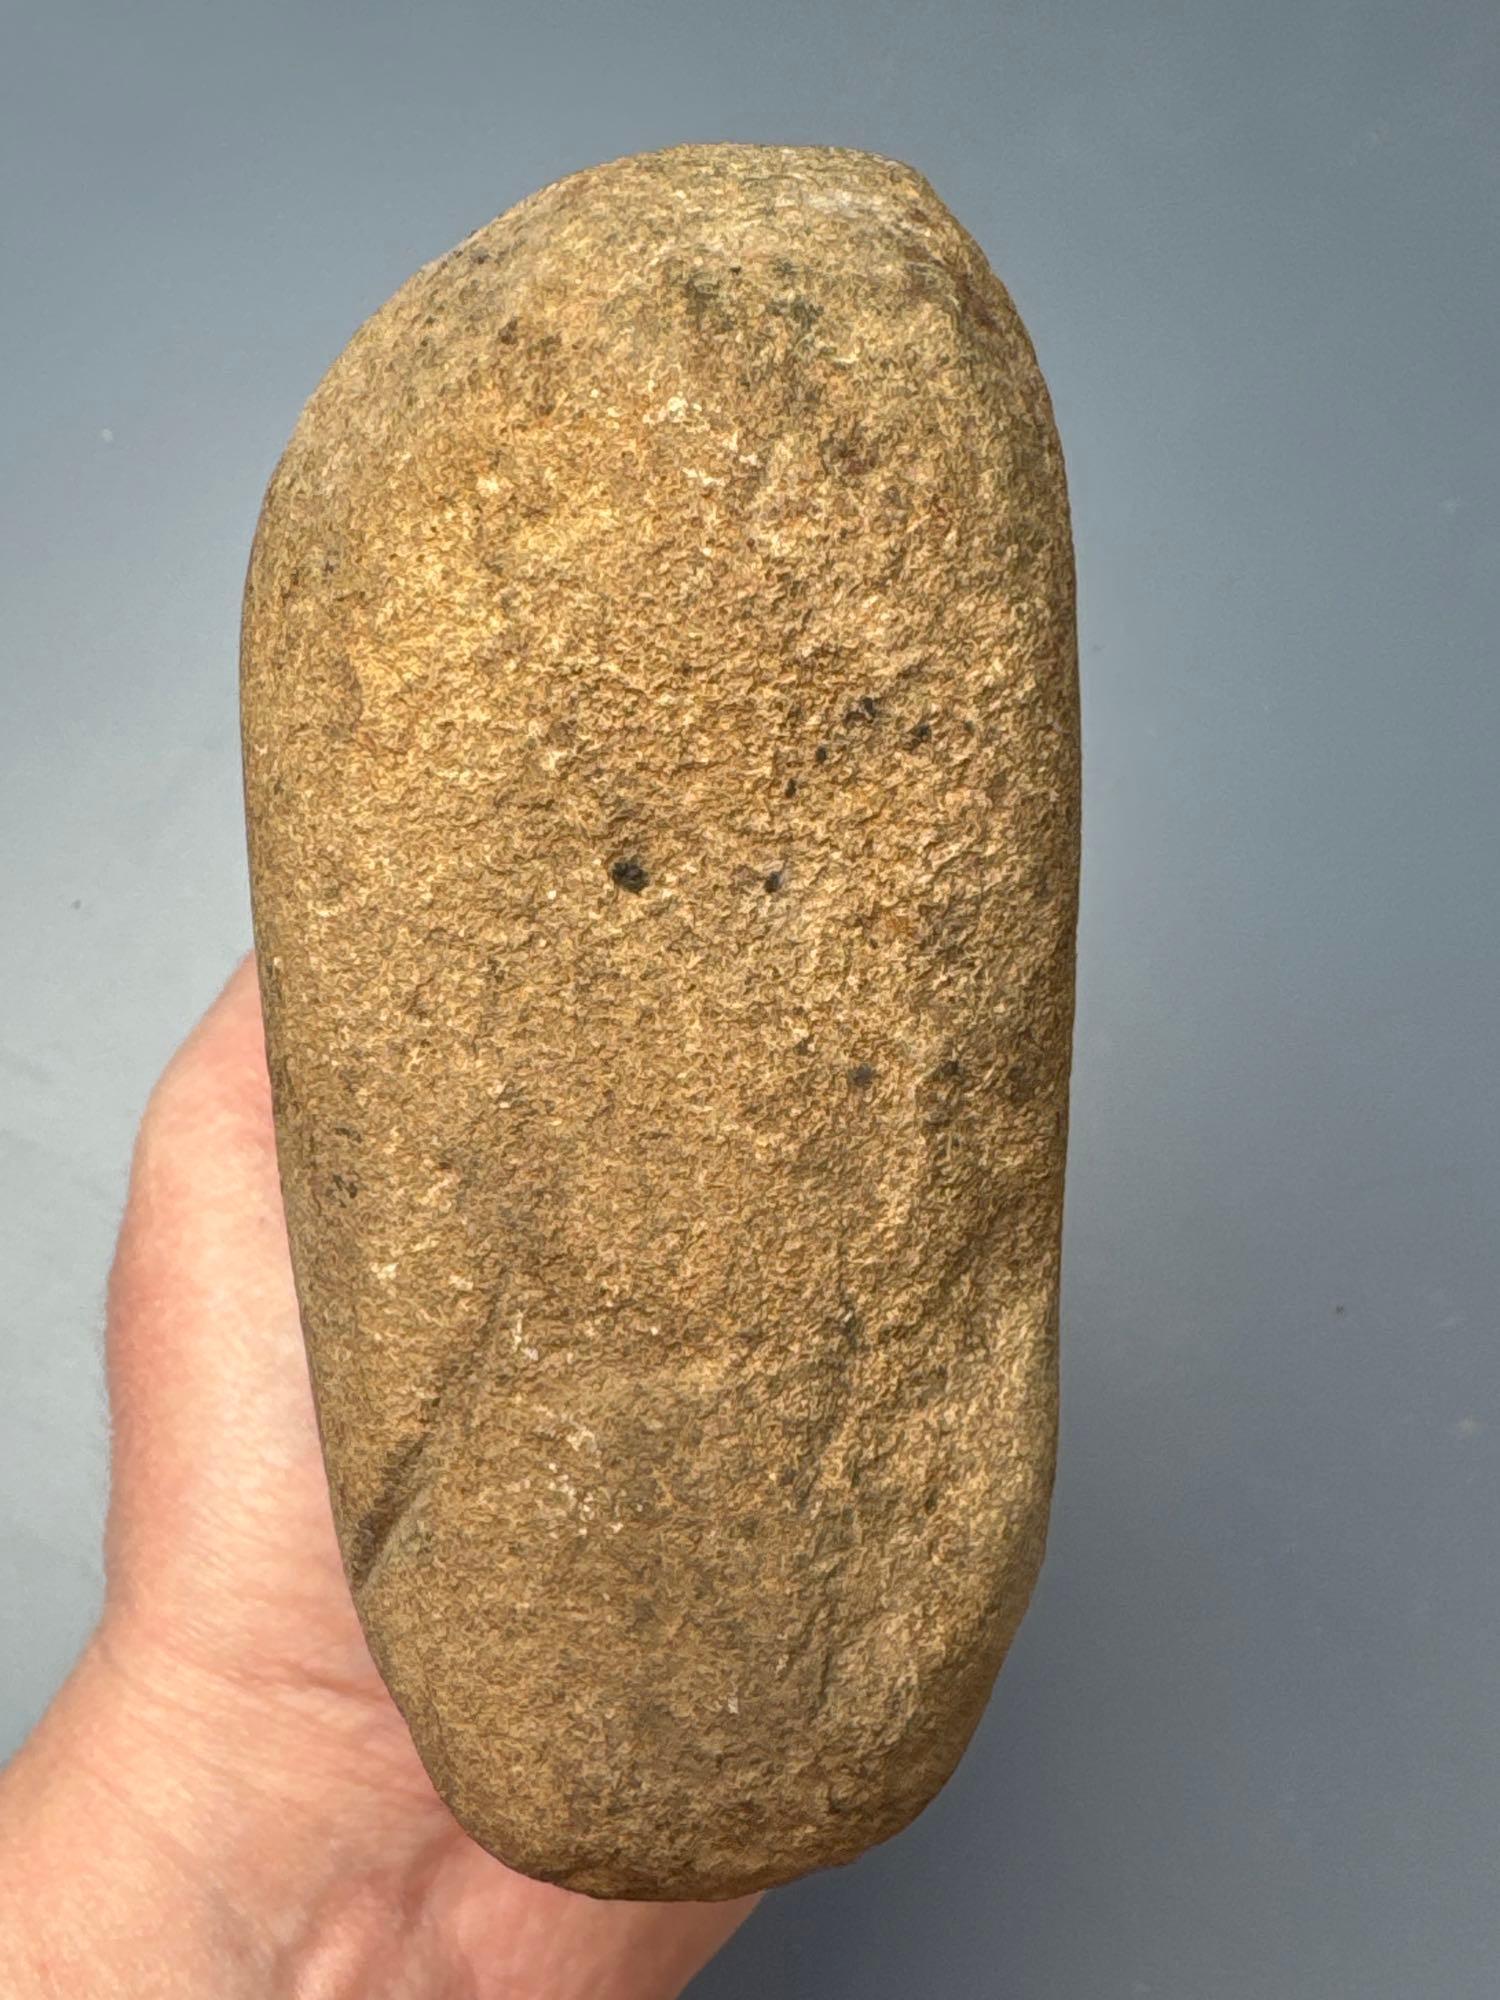 Heavy 5" Full Groove Axe, This and others were found in fields next to the Conn. River in East Winds